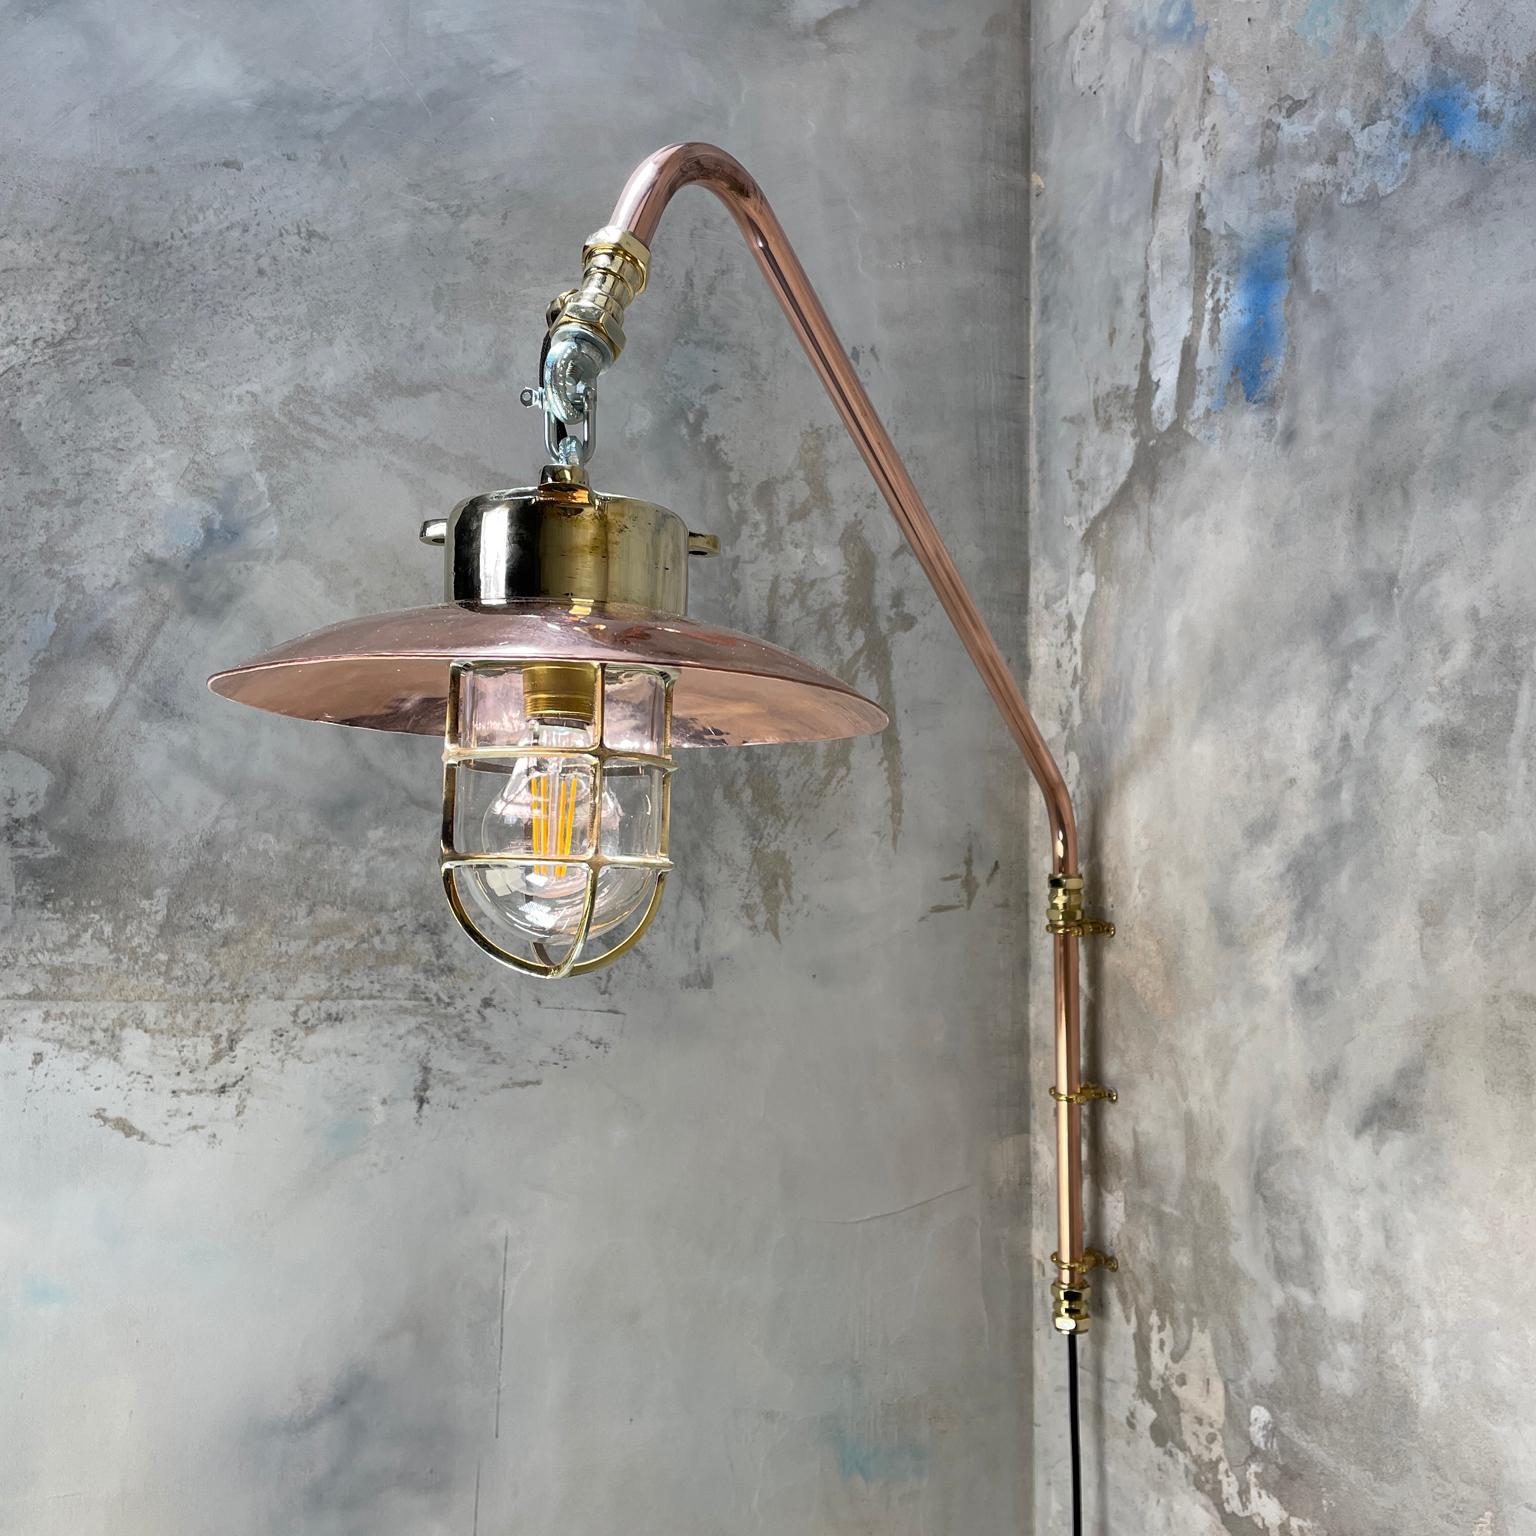 Copper and brass cantilever lamp with brass explosion proof pendant.

A solid cast brass reclaimed light fitting with new copper pipe cantilever, made in house.

The reclaimed explosion proof light was originally used on super tankers and cargo